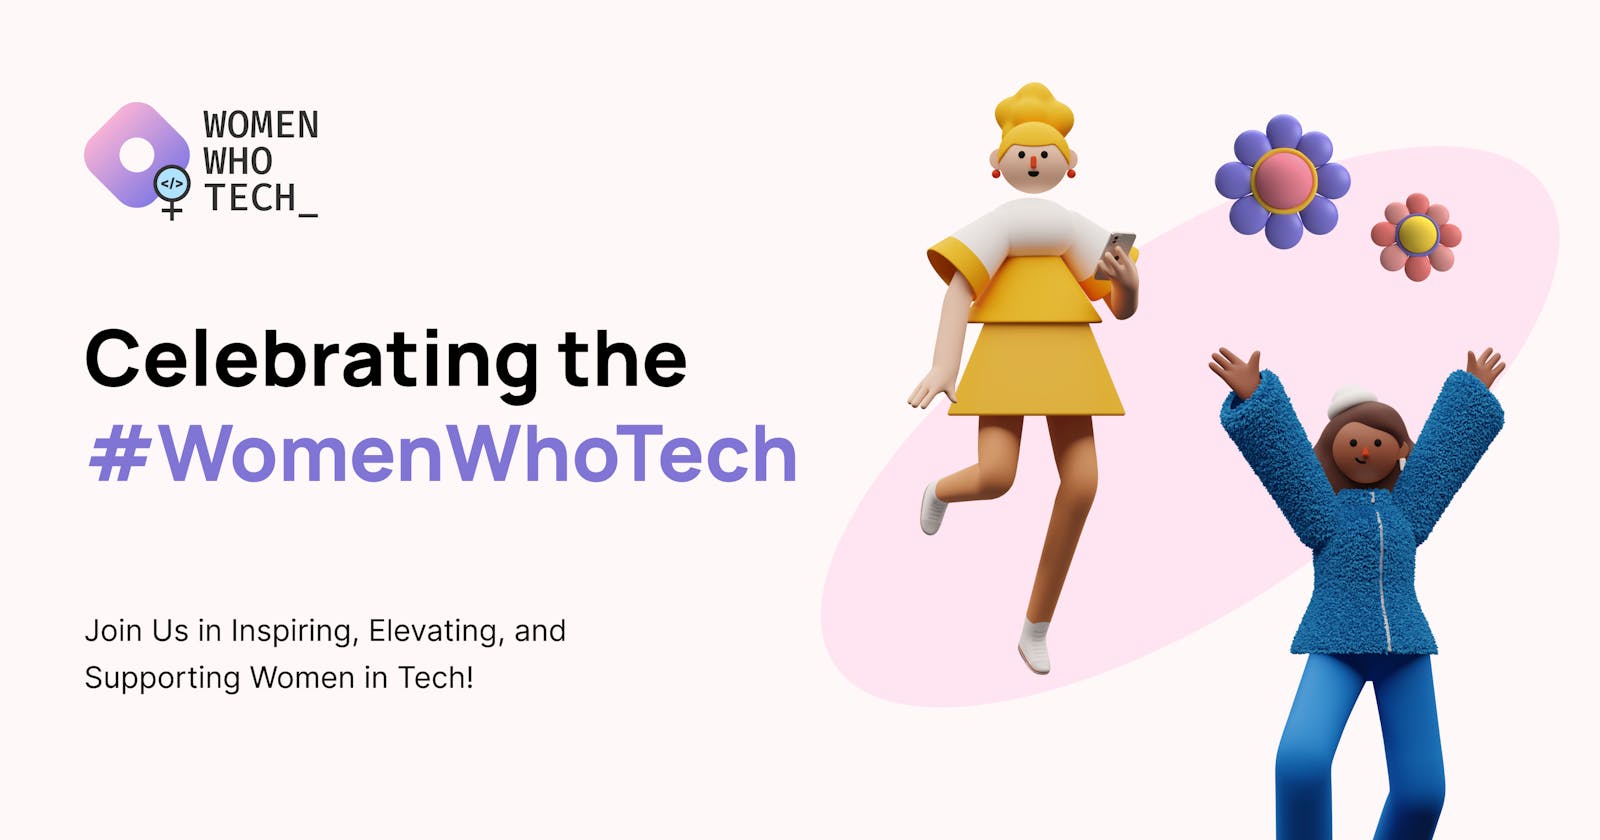 #WomenWhoTech: Join us in Inspiring, Elevating, and Supporting Women in Tech! 👩‍💻👨‍💻✨